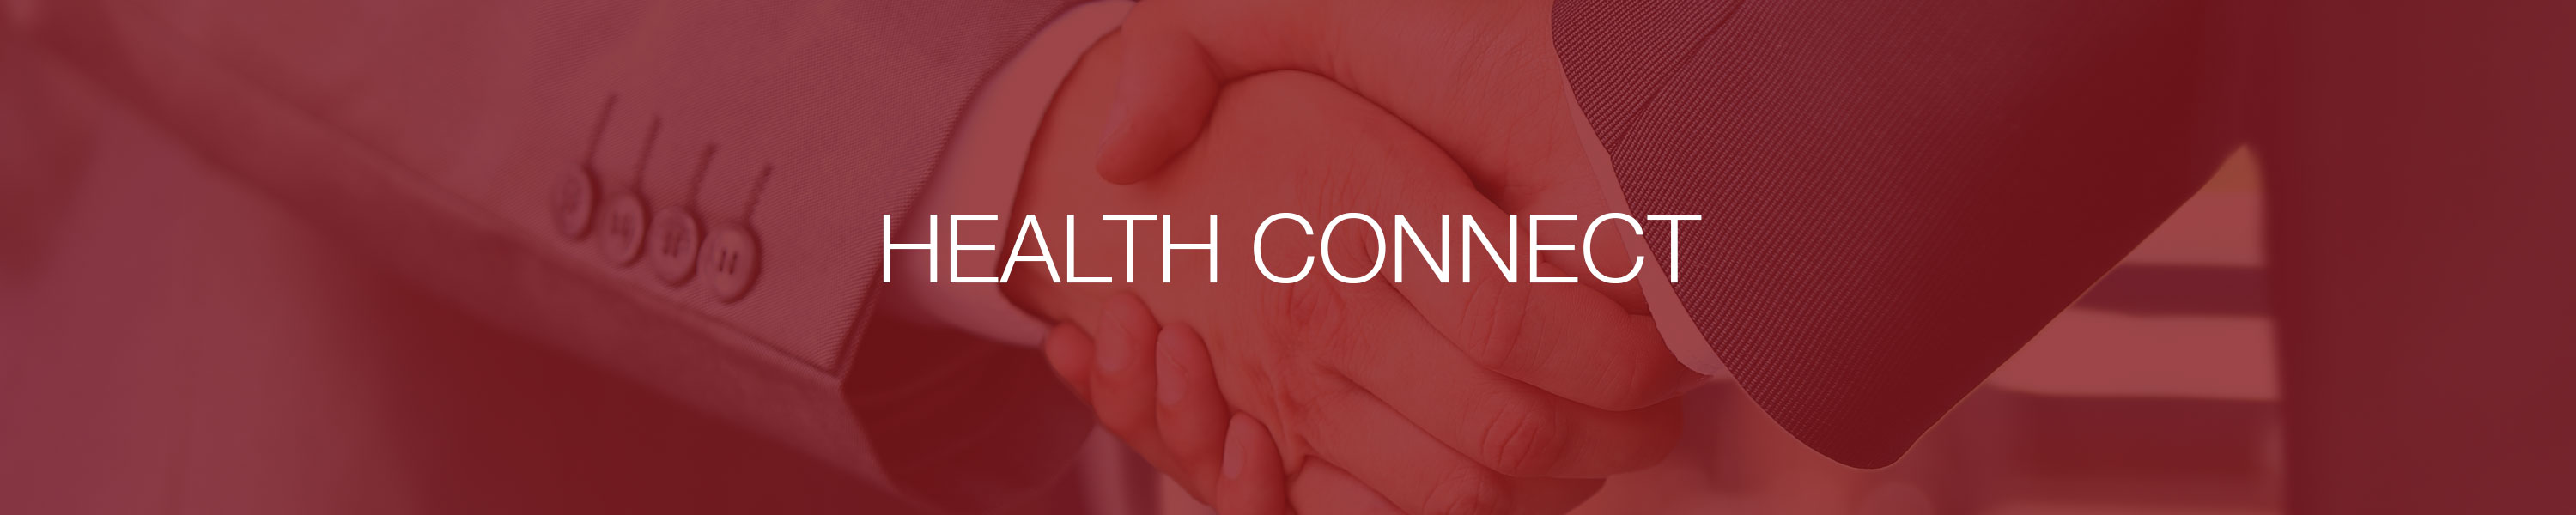 Health-Connect